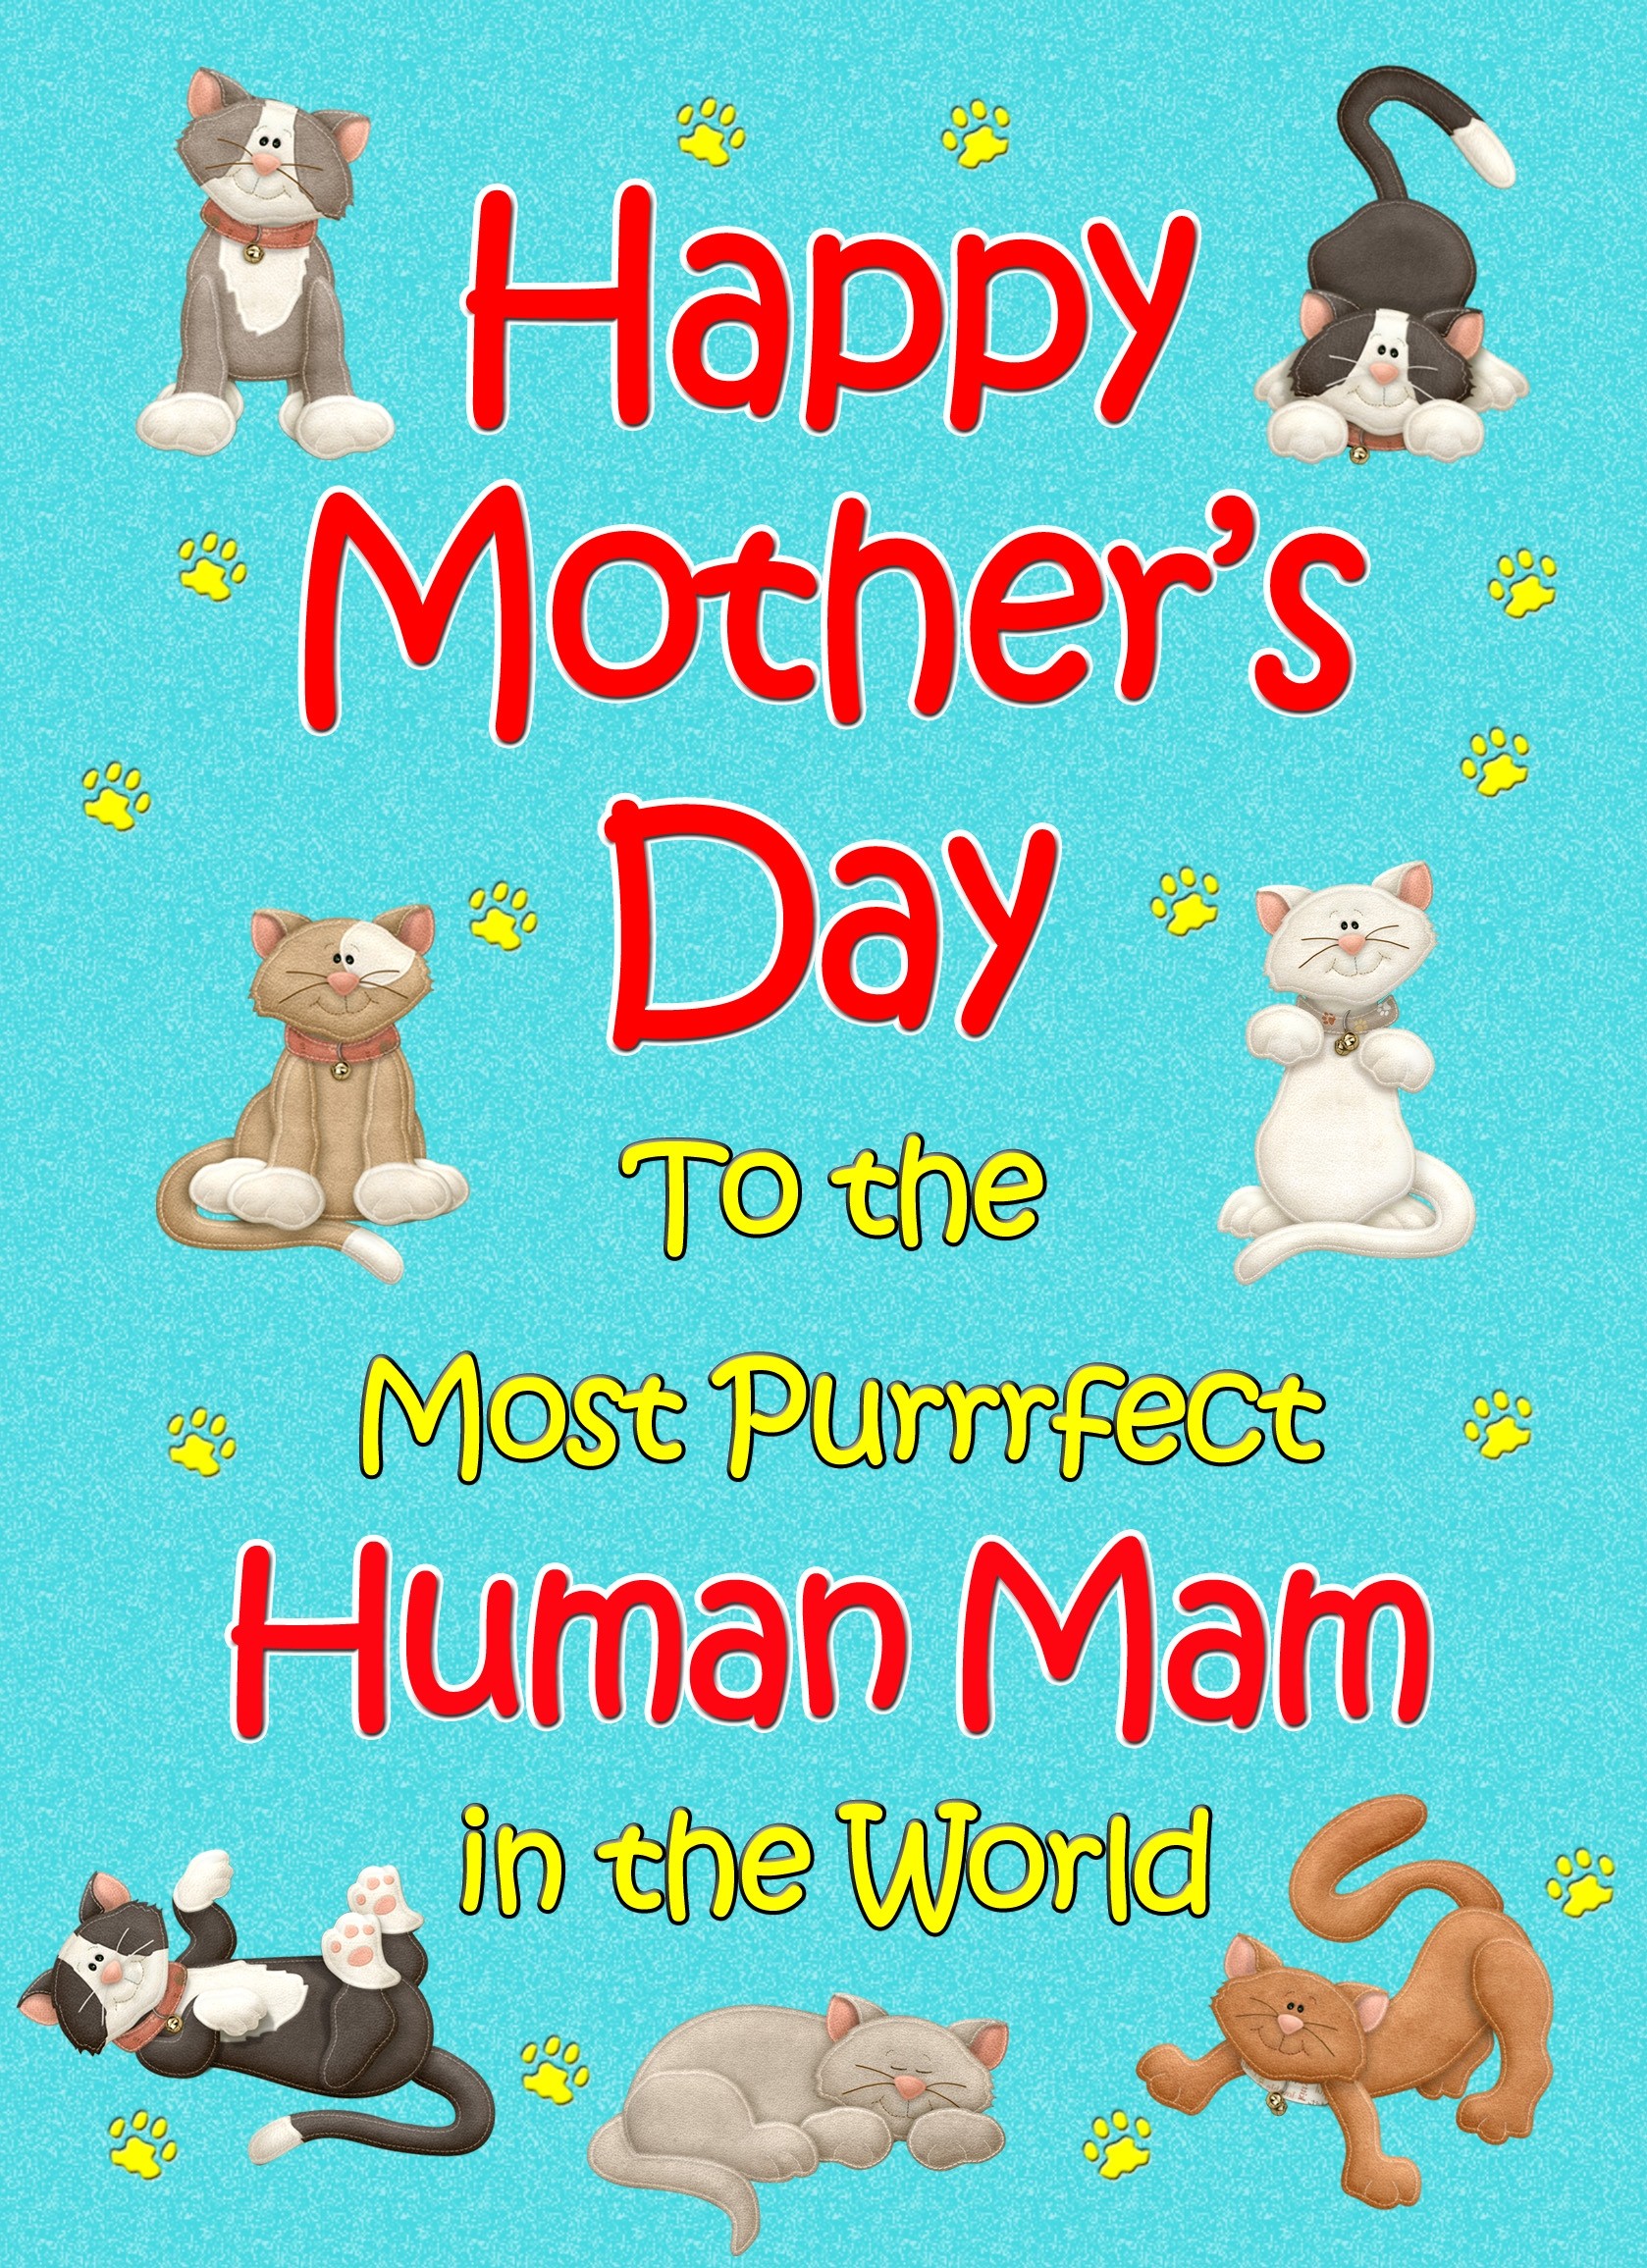 From The Cat Mothers Day Card (Turquoise, Purrrfect Human Mam)